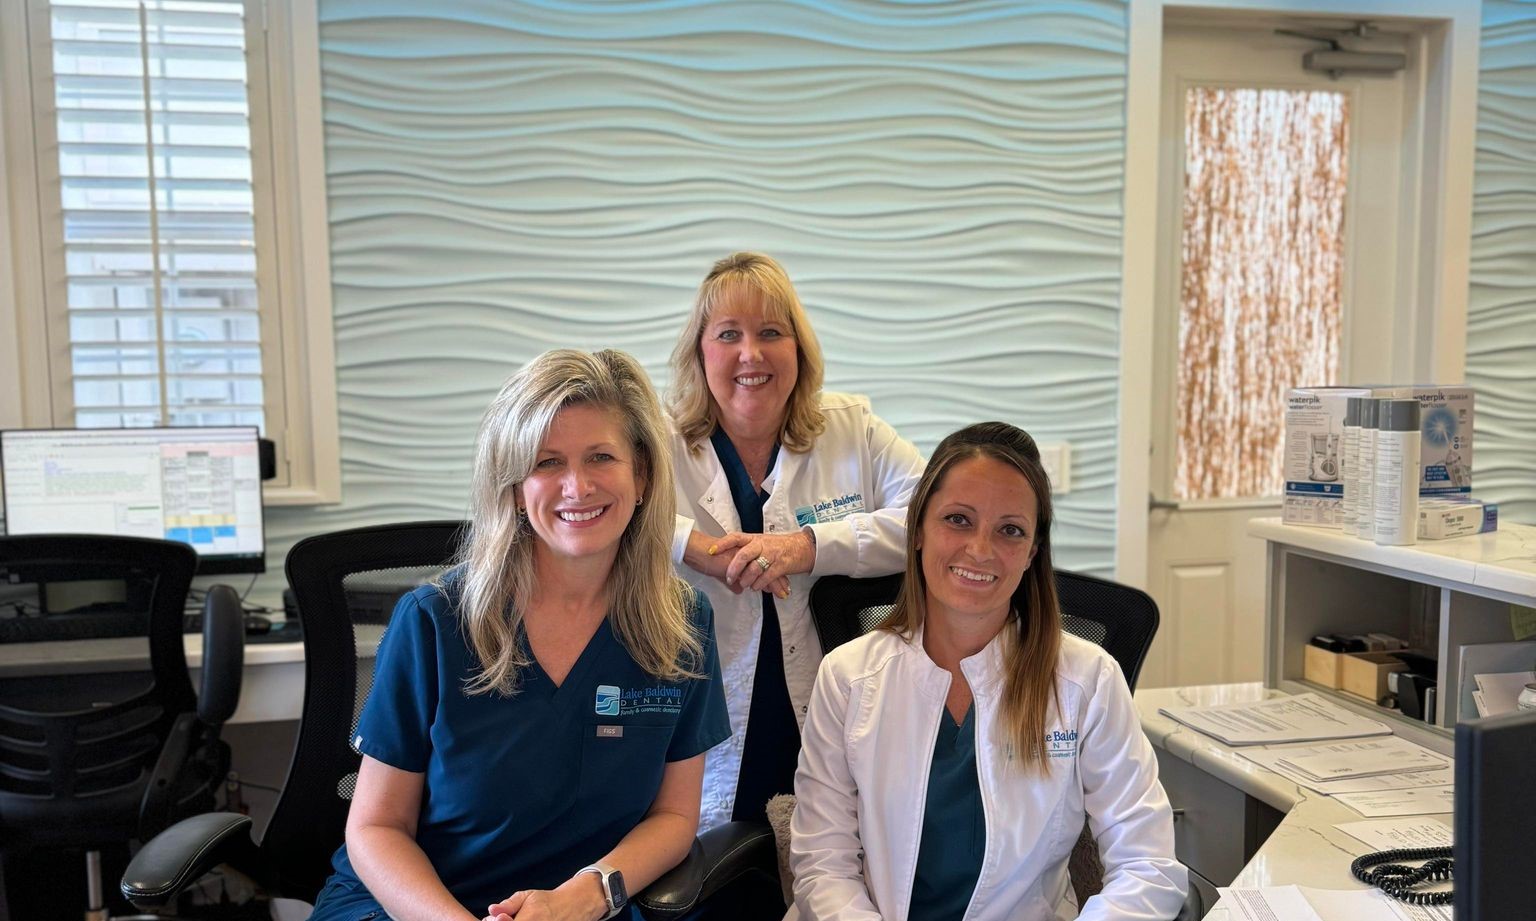 Image shows three smiling women at the front desk of Lake Baldwin Dental, who are dedicated to making LBD the best dentist in Orlando!